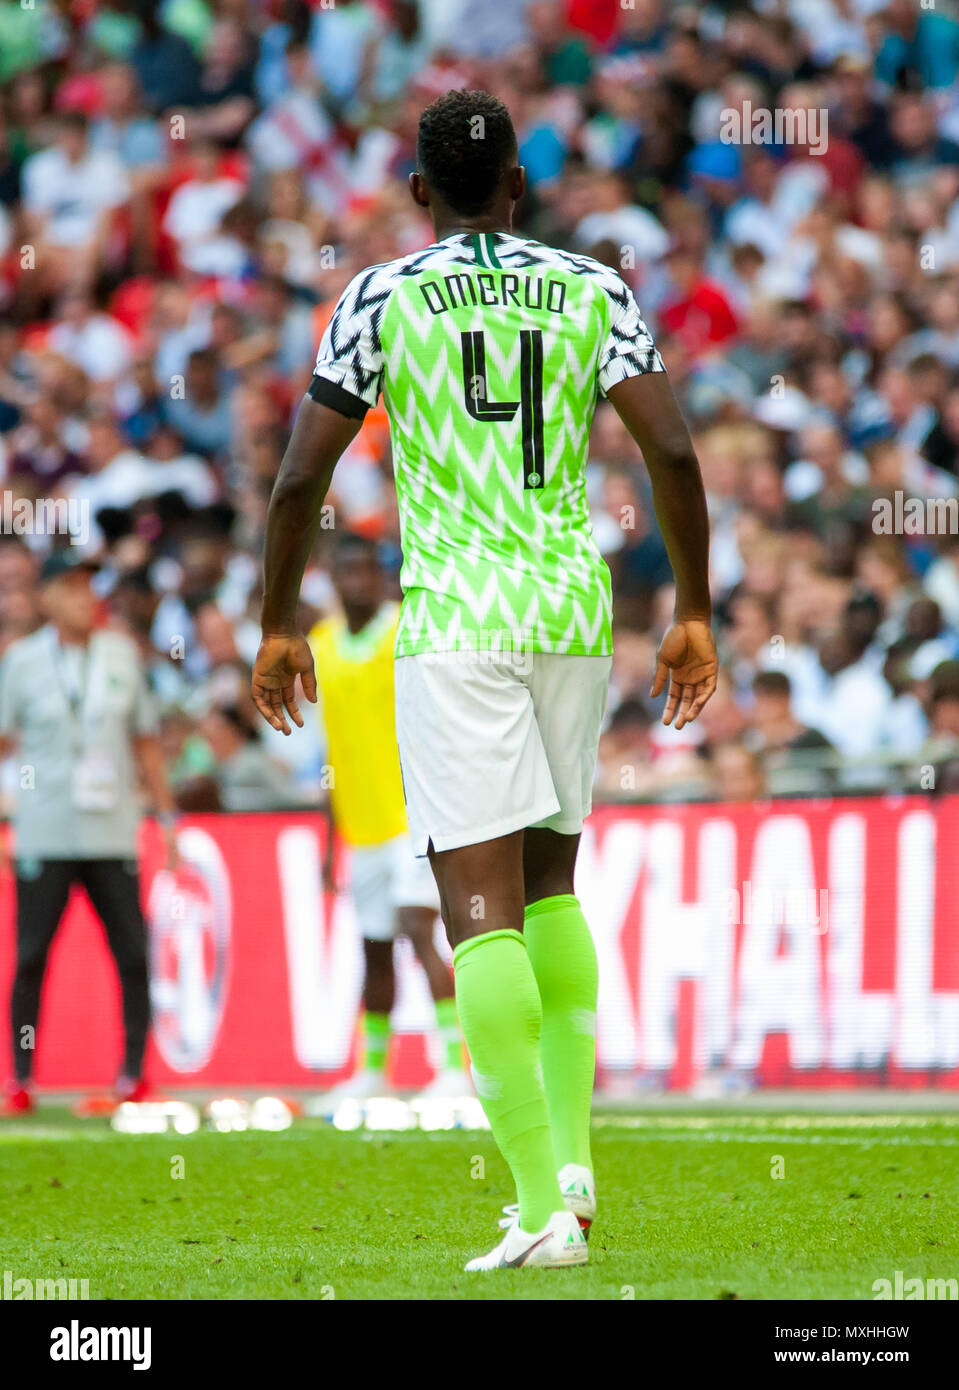 Wembley, United Kingdom. 2nd June 2018. ENGLAND took on Nigeria as they prepare for the World Cup this summer. England won the game 2 - 1. Stock Photo